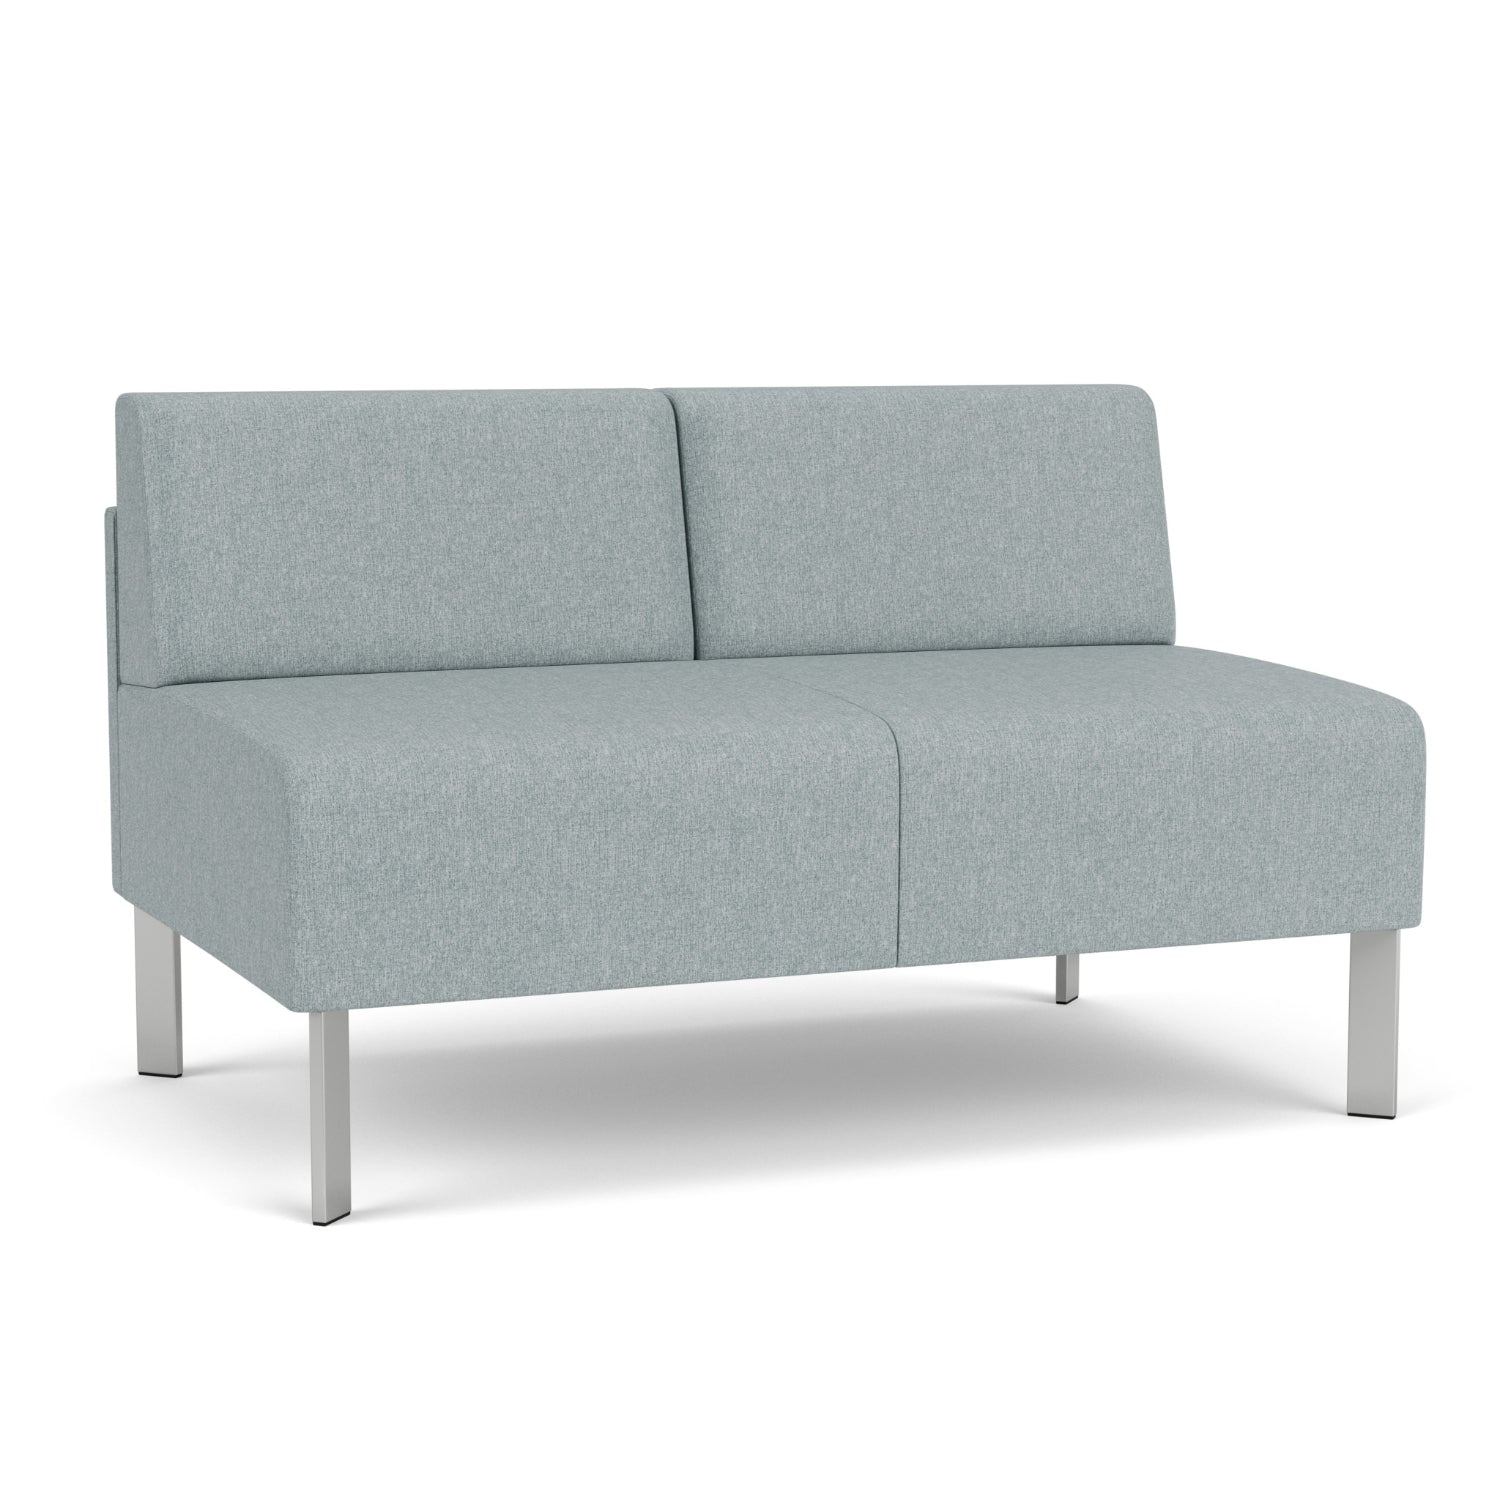 Luxe Collection Reception Seating, Armless Loveseat, Healthcare Vinyl Upholstery, FREE SHIPPING